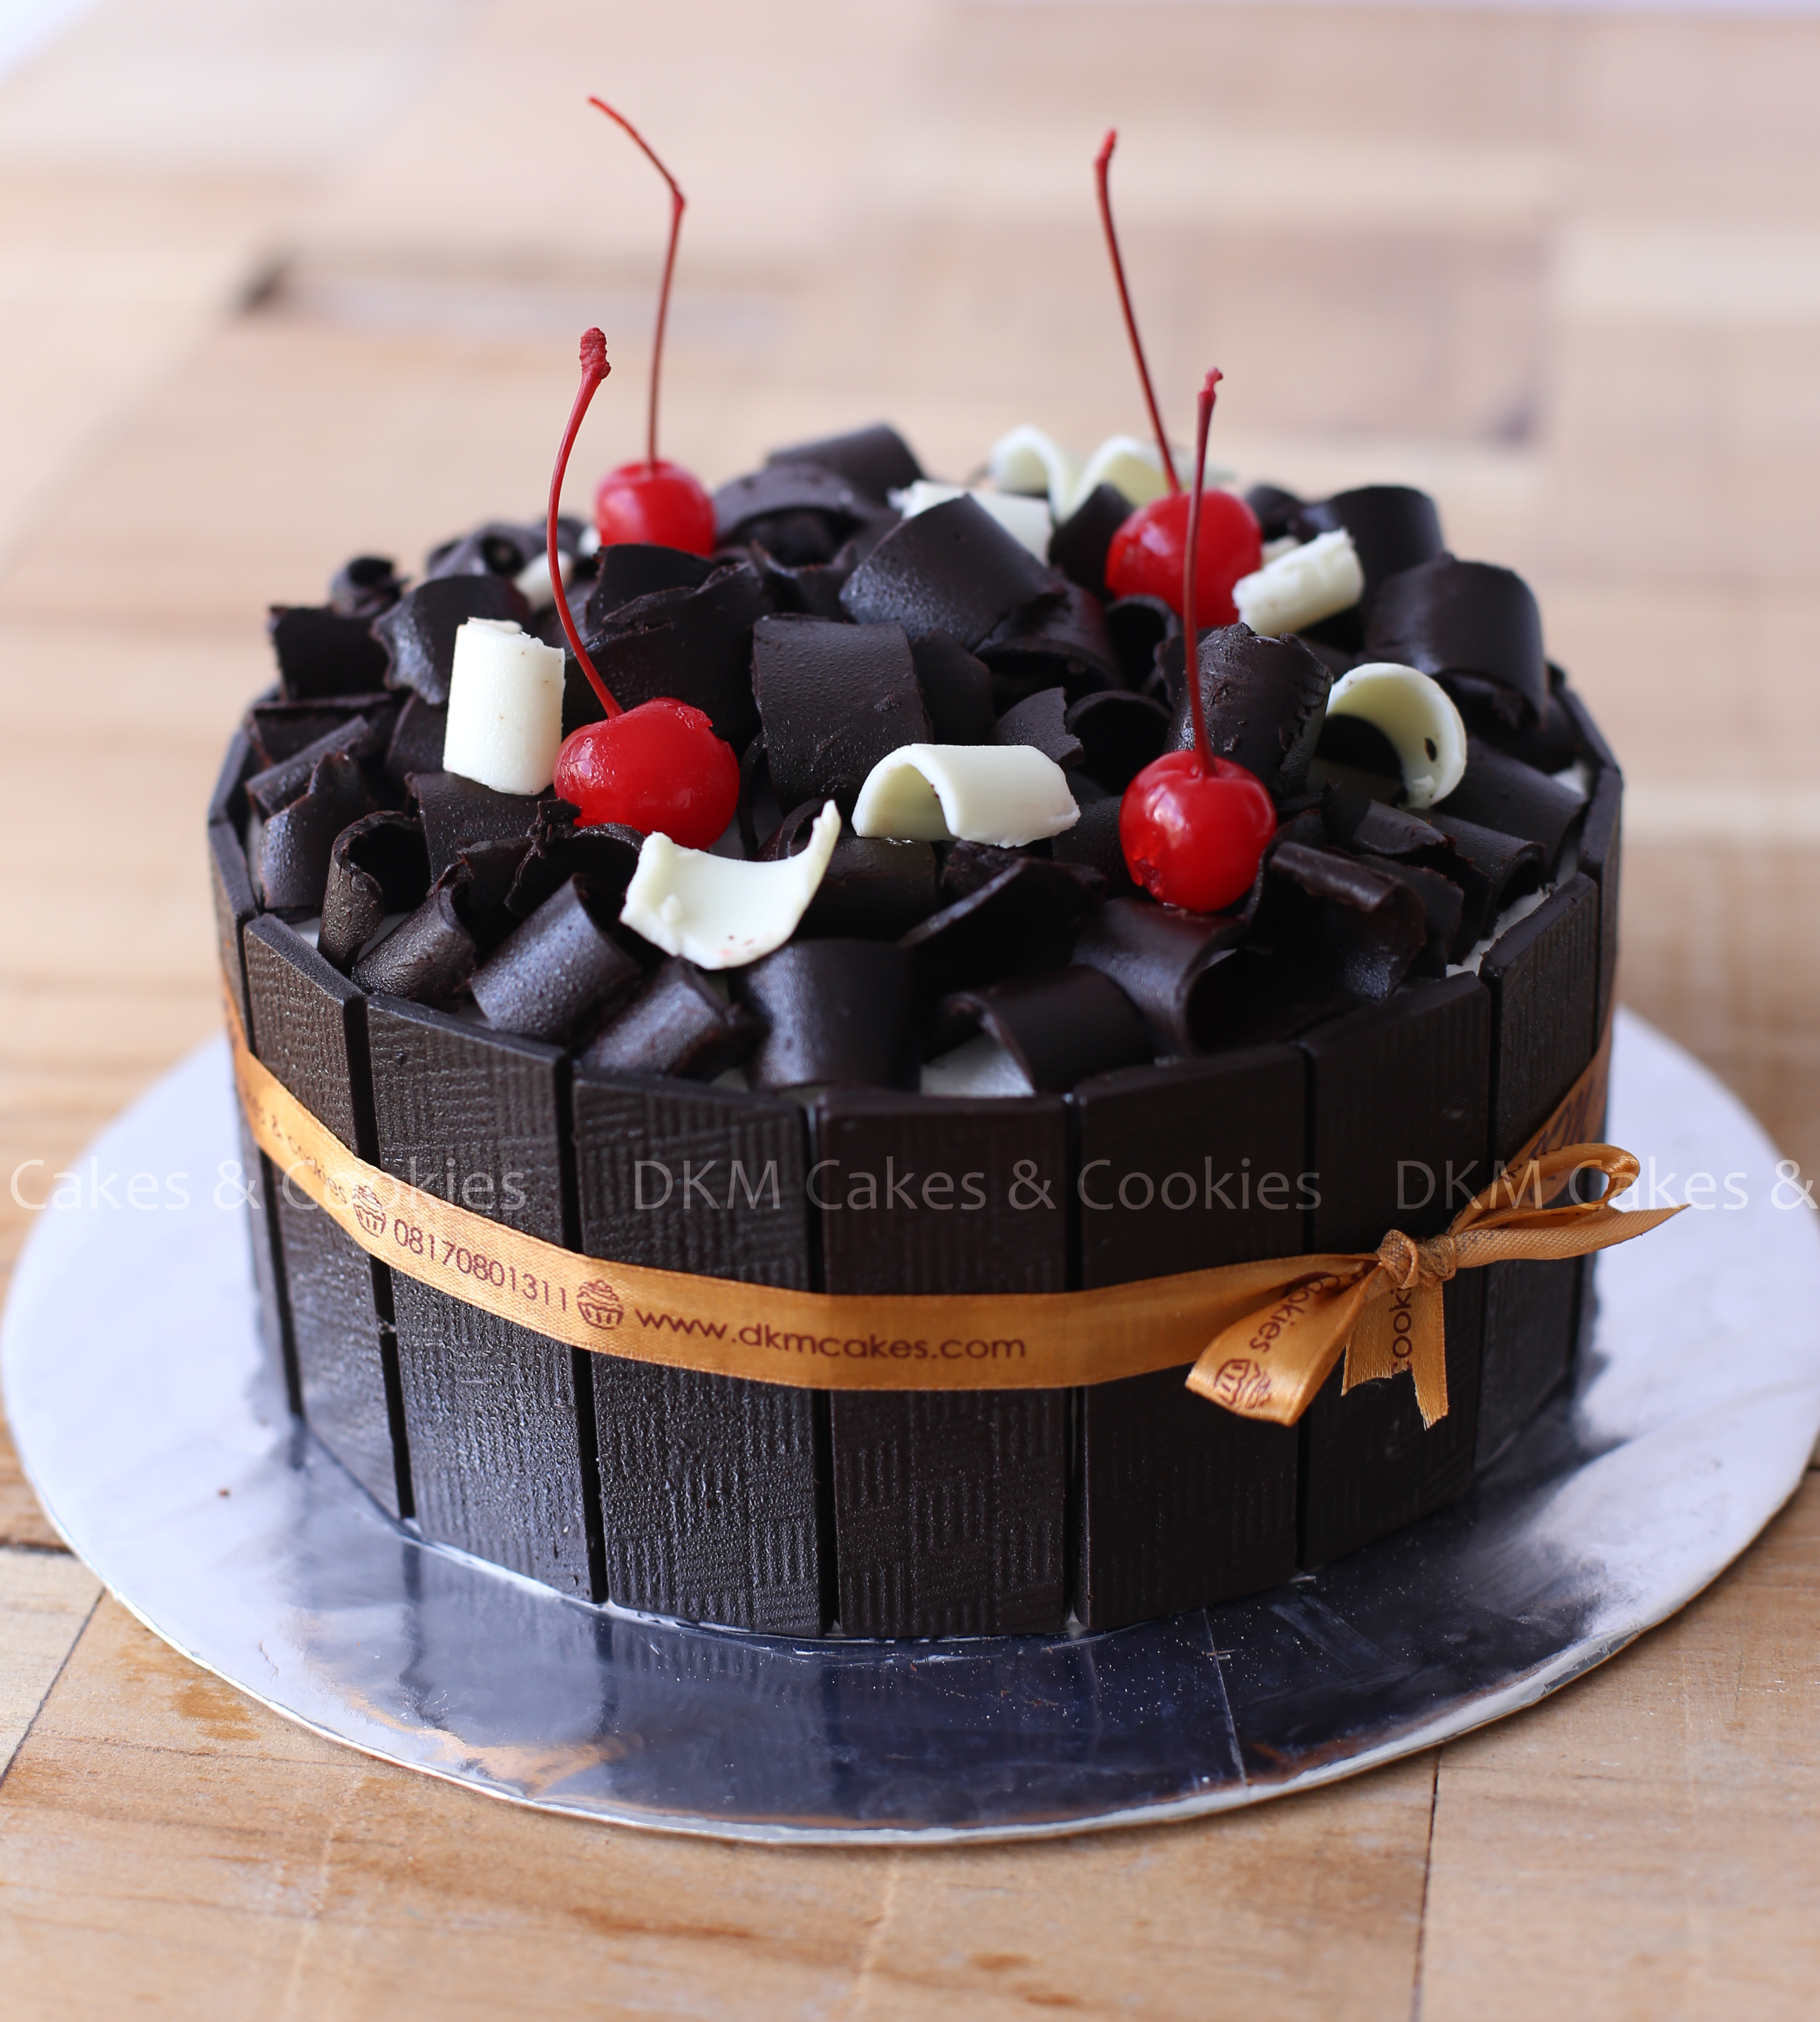 1. Black Forest DKM Cakes